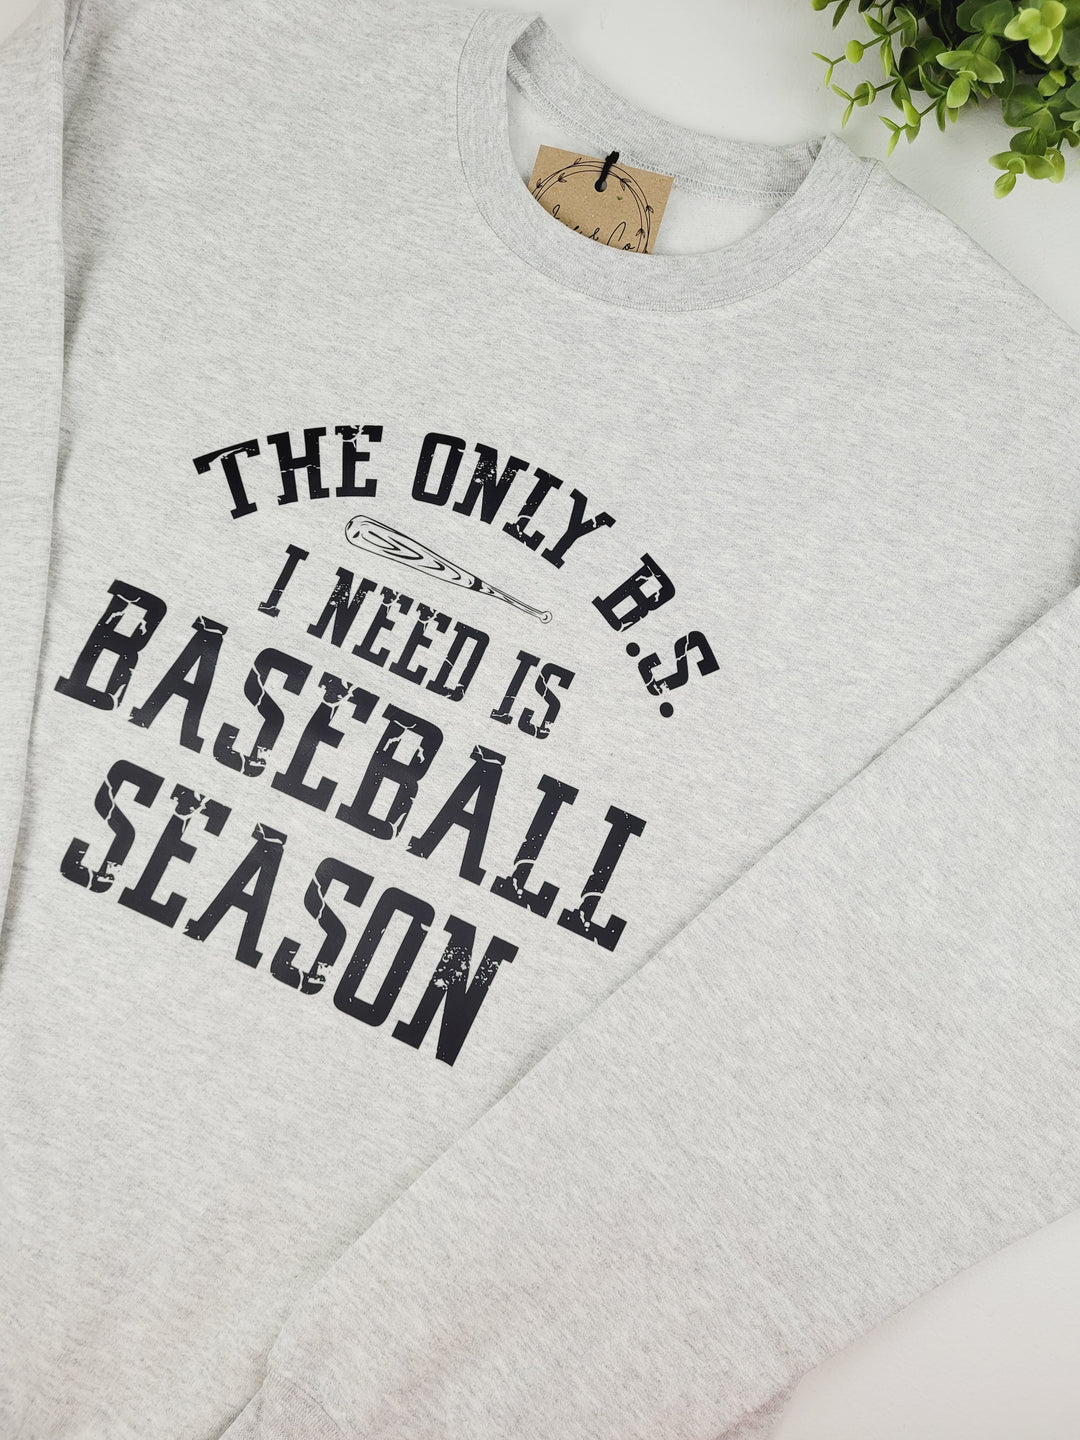 June & Co Designs, The Only B.S. I Need Is Baseball Season Grey Crewneck Sweaters